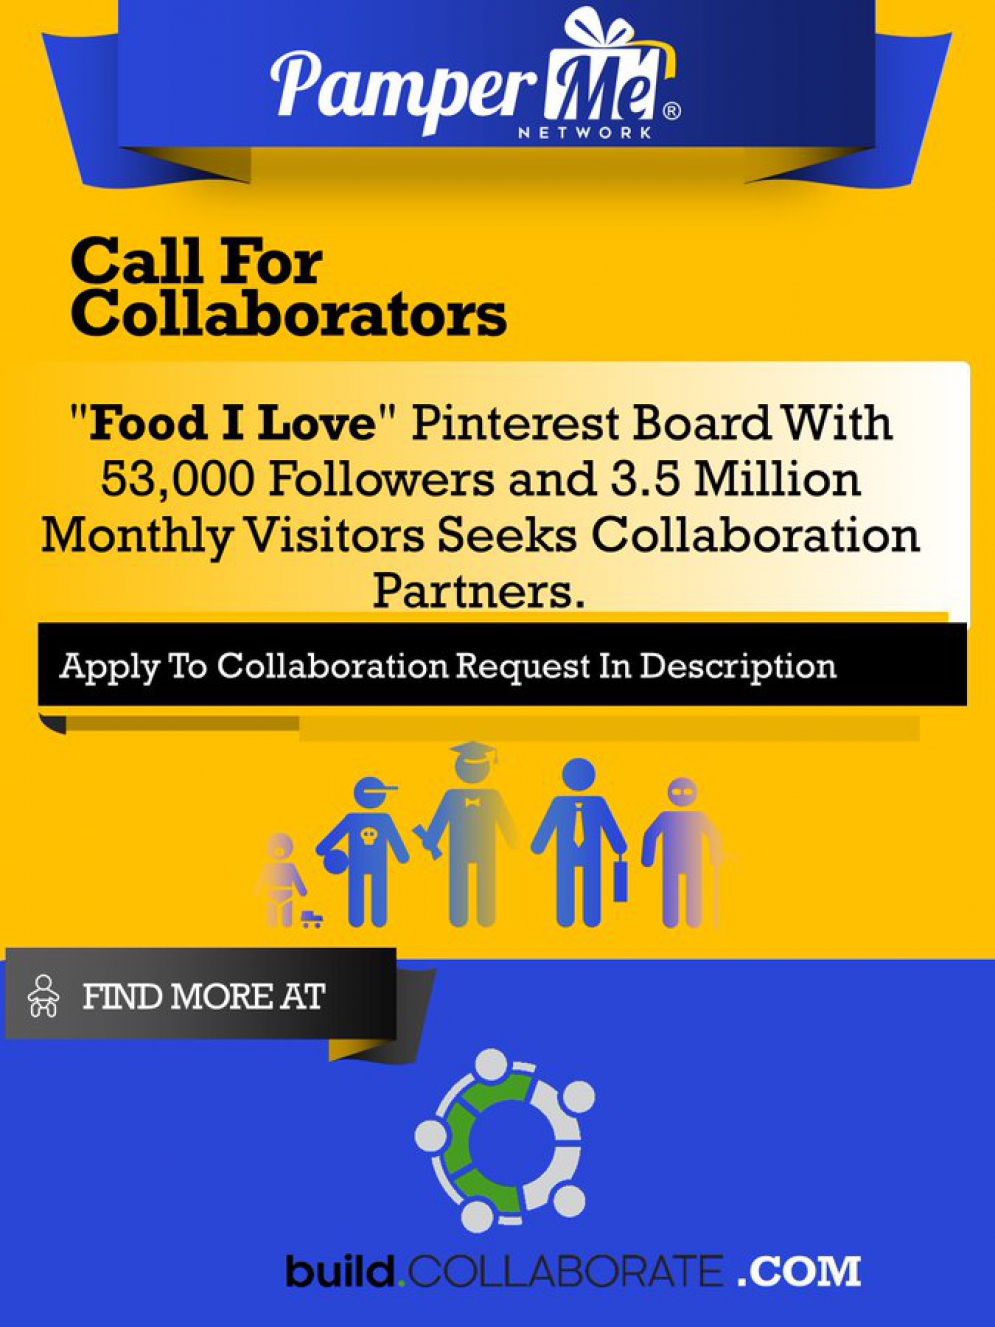 Collaborators Required For Food I Love Pinterest Board - Target 53,000 Followers and 3.5 Million Monthly Visitors